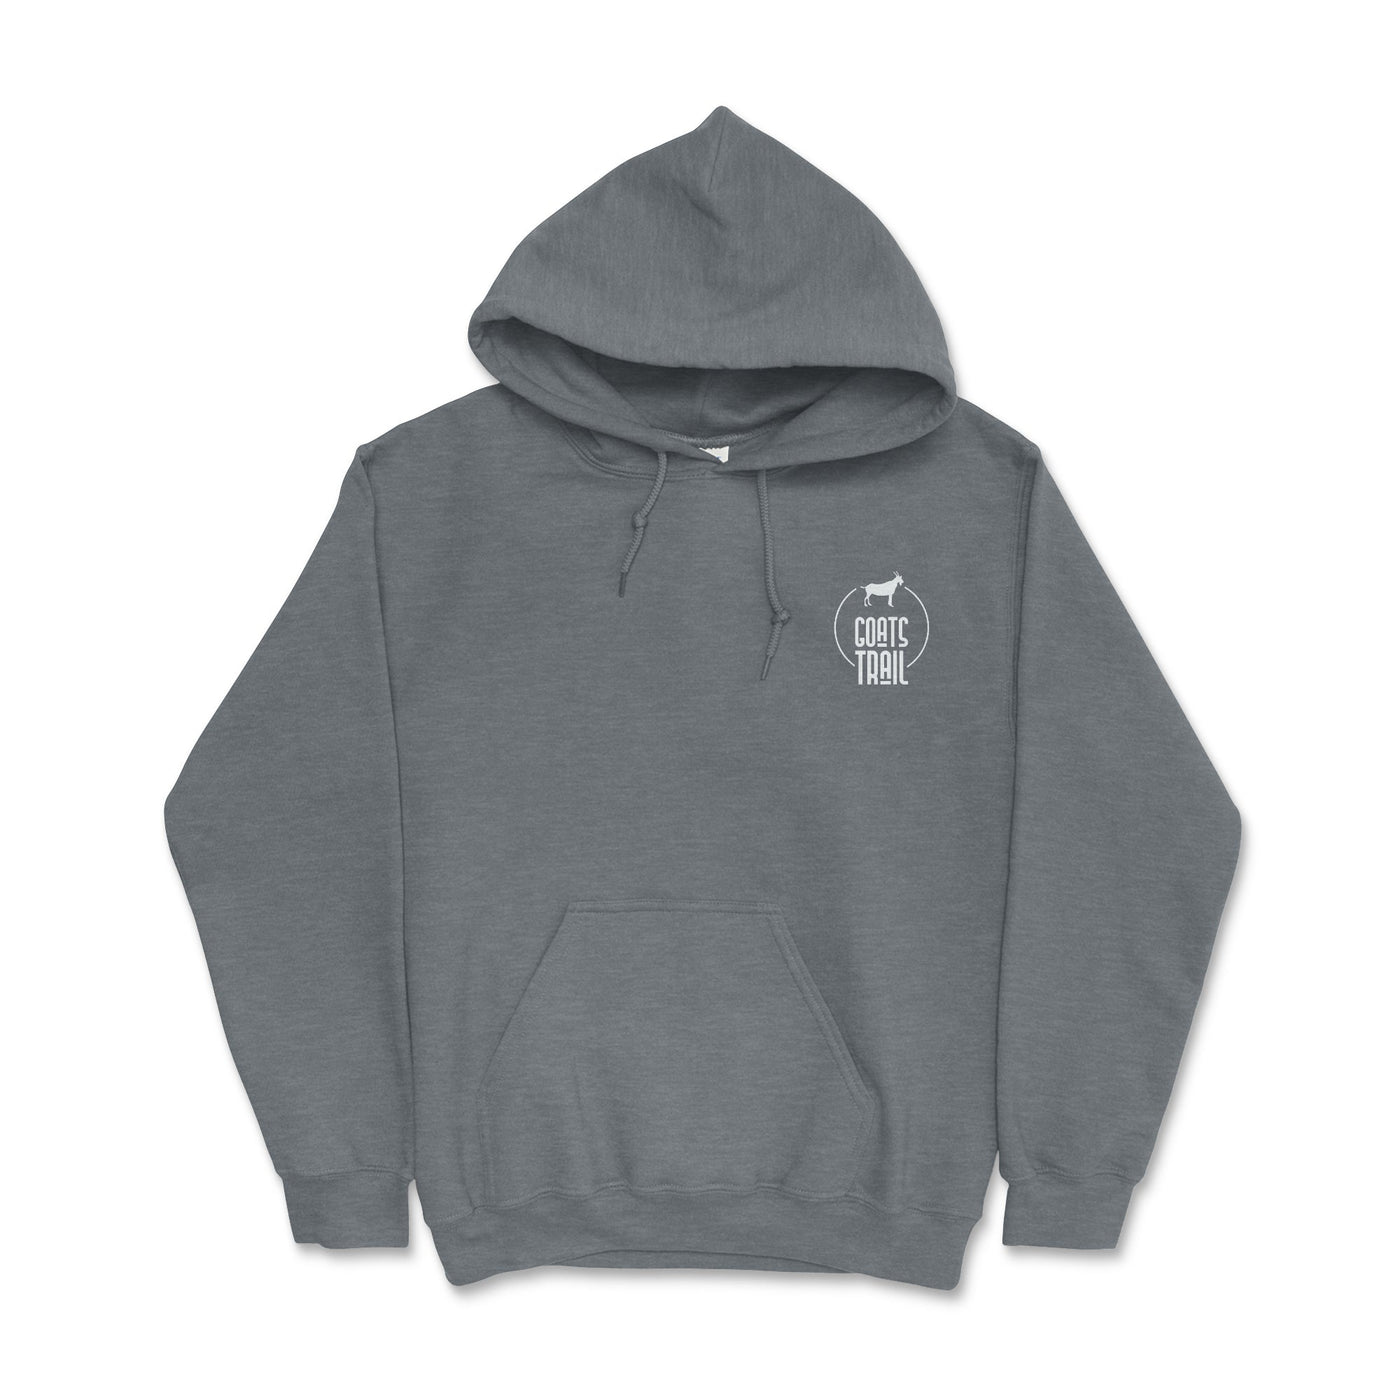 Gladiator Lake Bound Hoodie - Goats Trail Off-Road Apparel Company